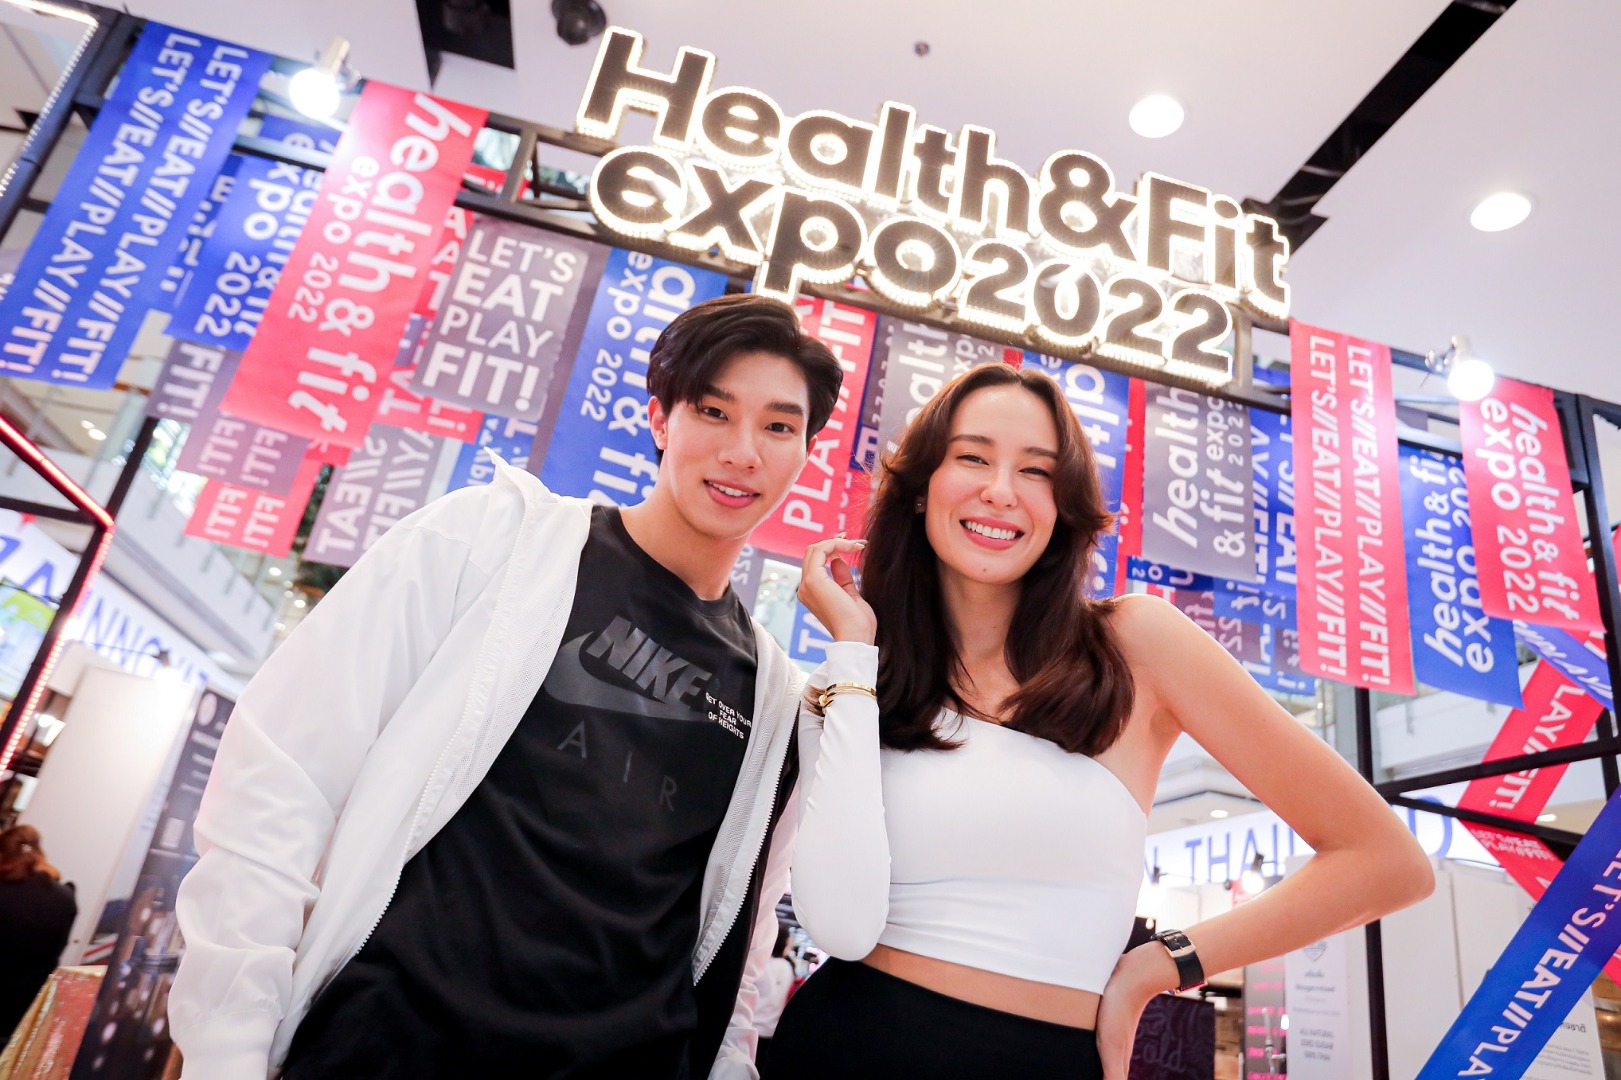 Health & Fit Expo 2022 